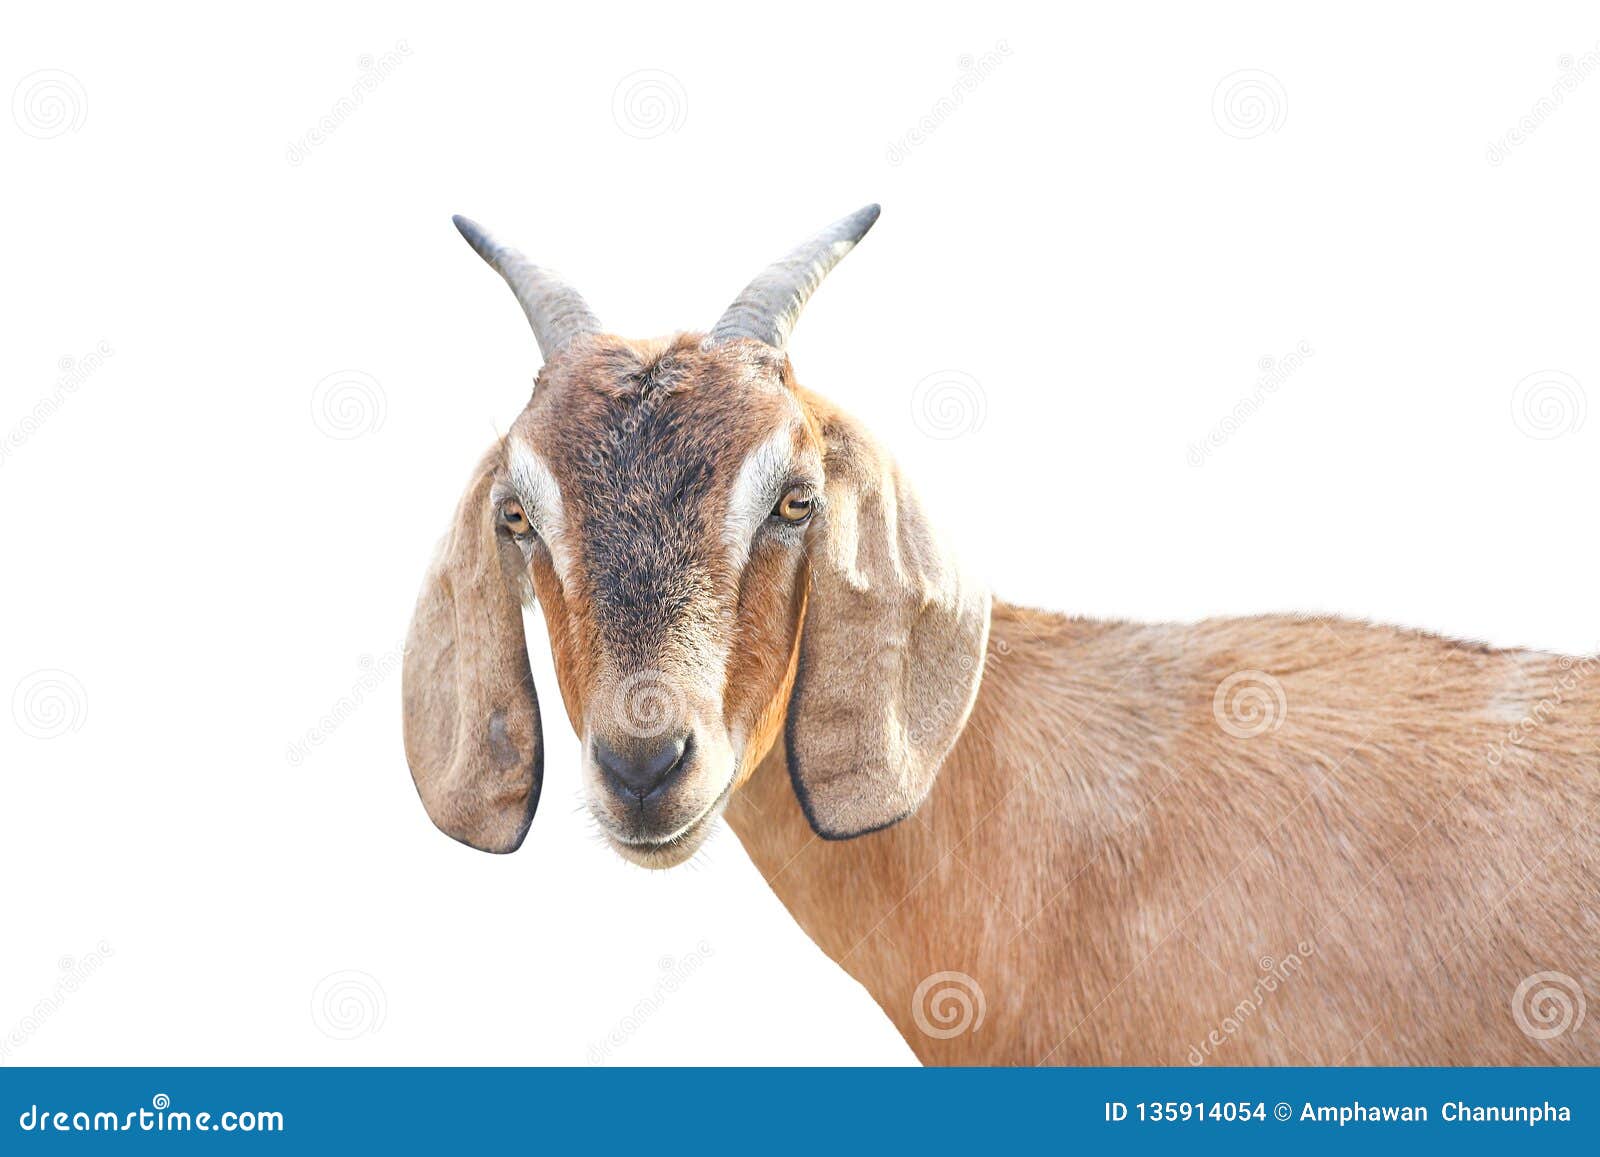 brown goat head standing and looking at camera  on white background ,apra aegagrus hircus relaxed time